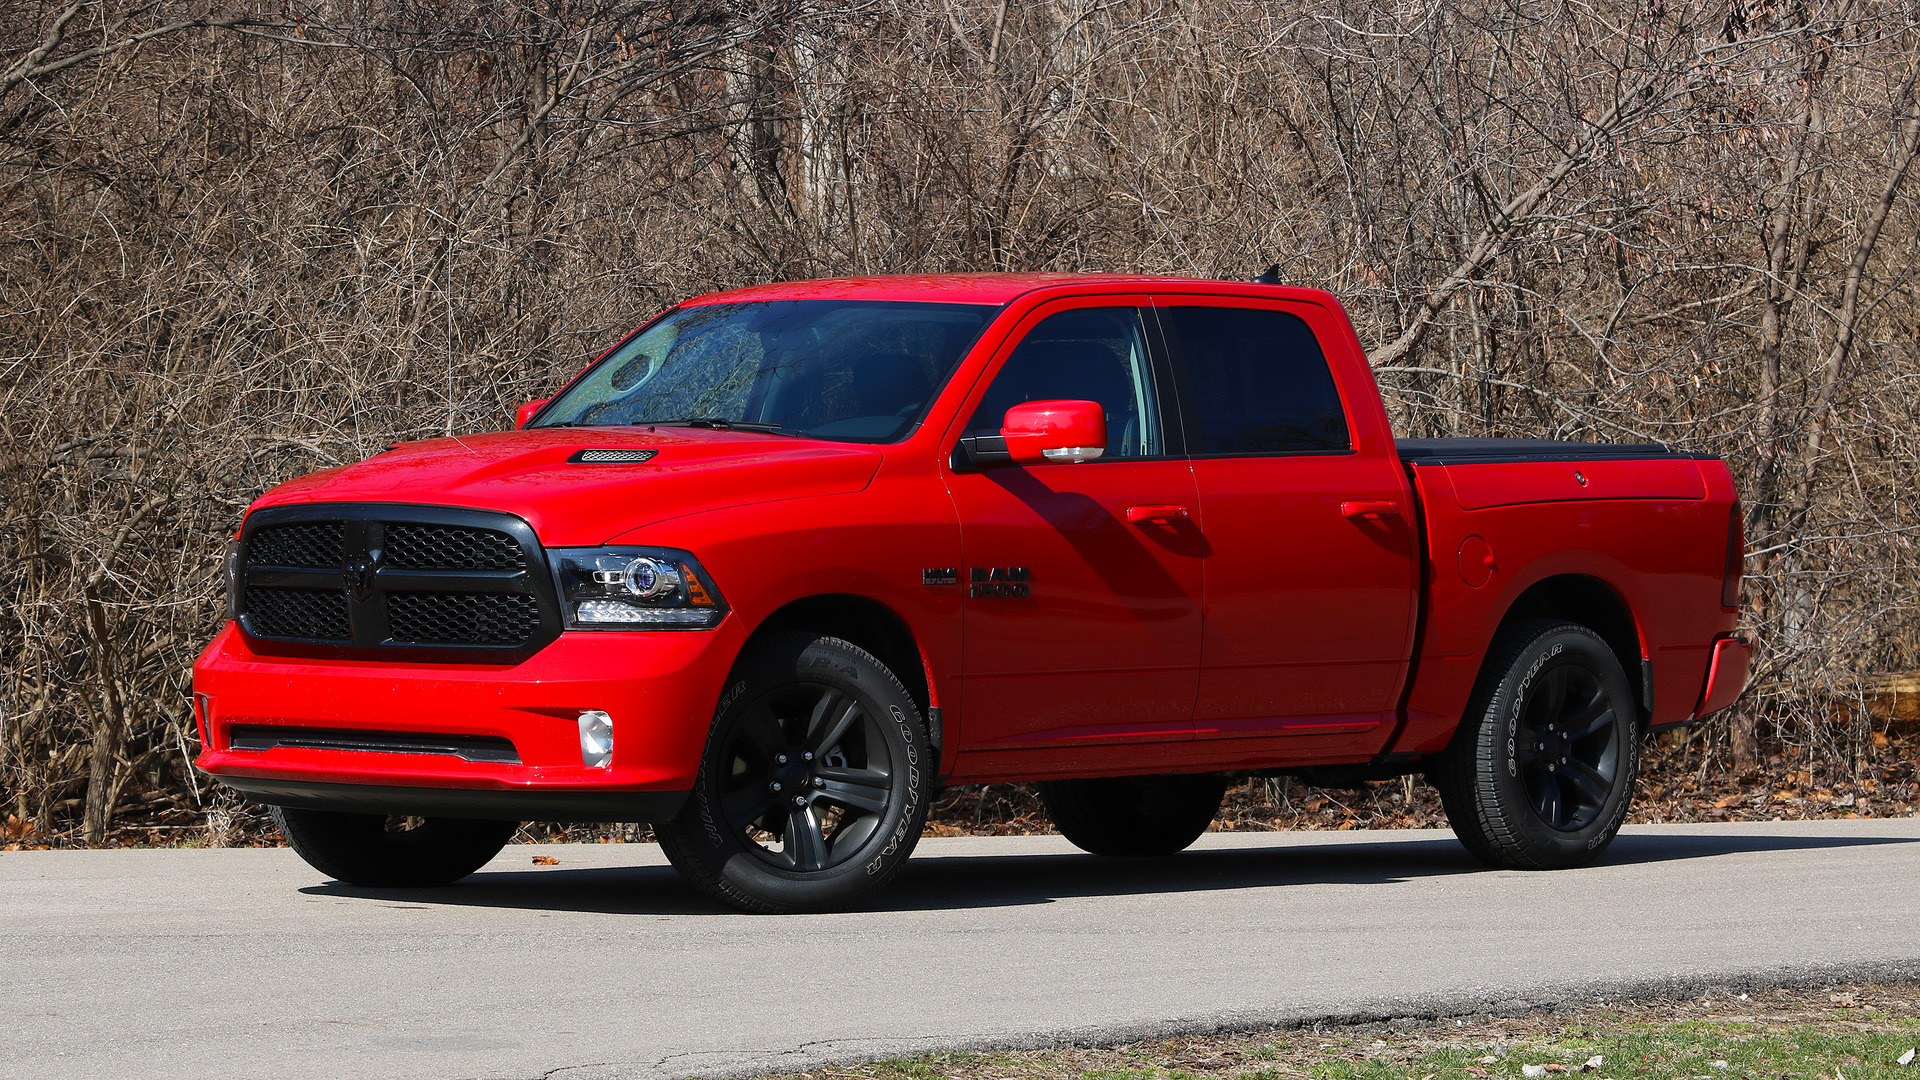 Ram 1500 Review: Great truck, great engine, great refinement